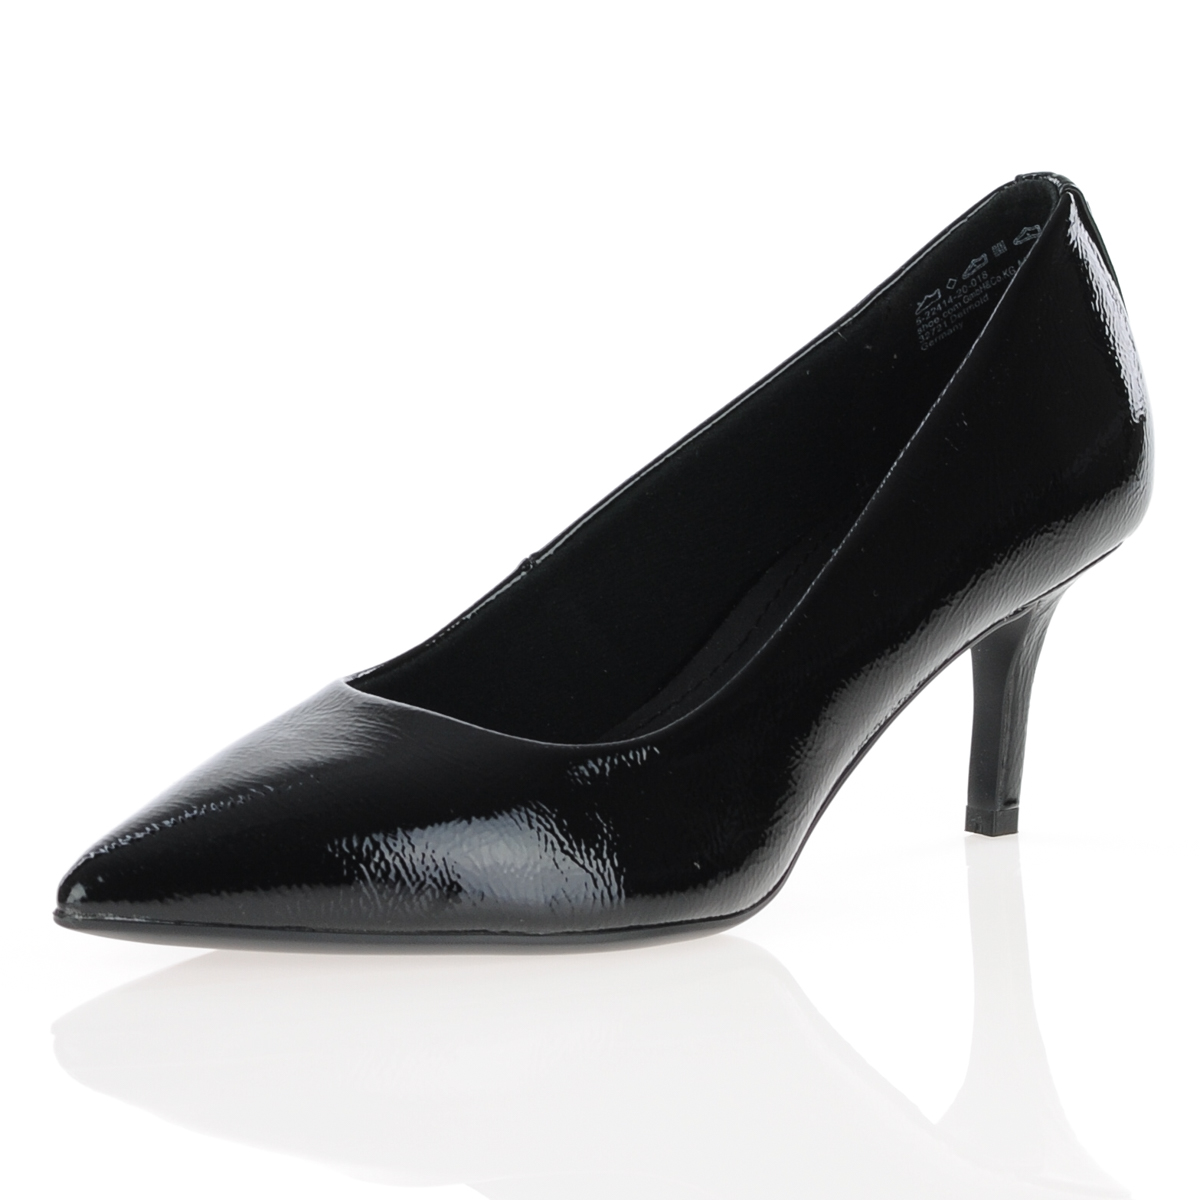  - Heeled Court Shoes Black Patent - 22414, The Shoe Horn